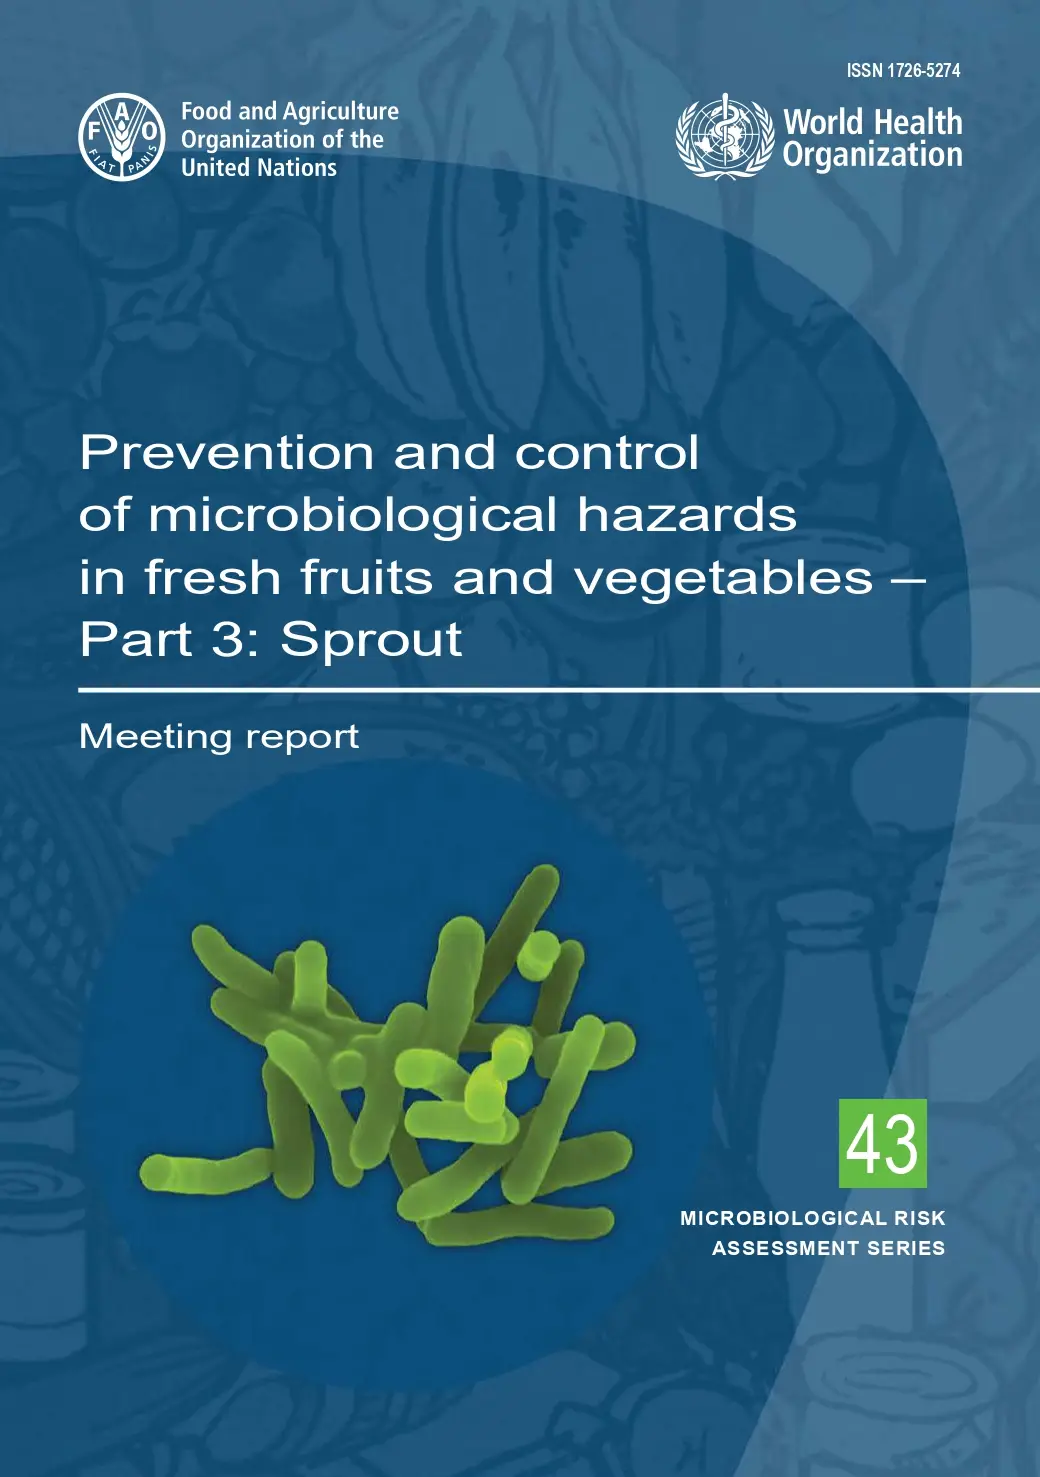 Prevention And Control Of Microbiological Hazards In Fresh Fruits And Vegetables – Part 3: Sprout